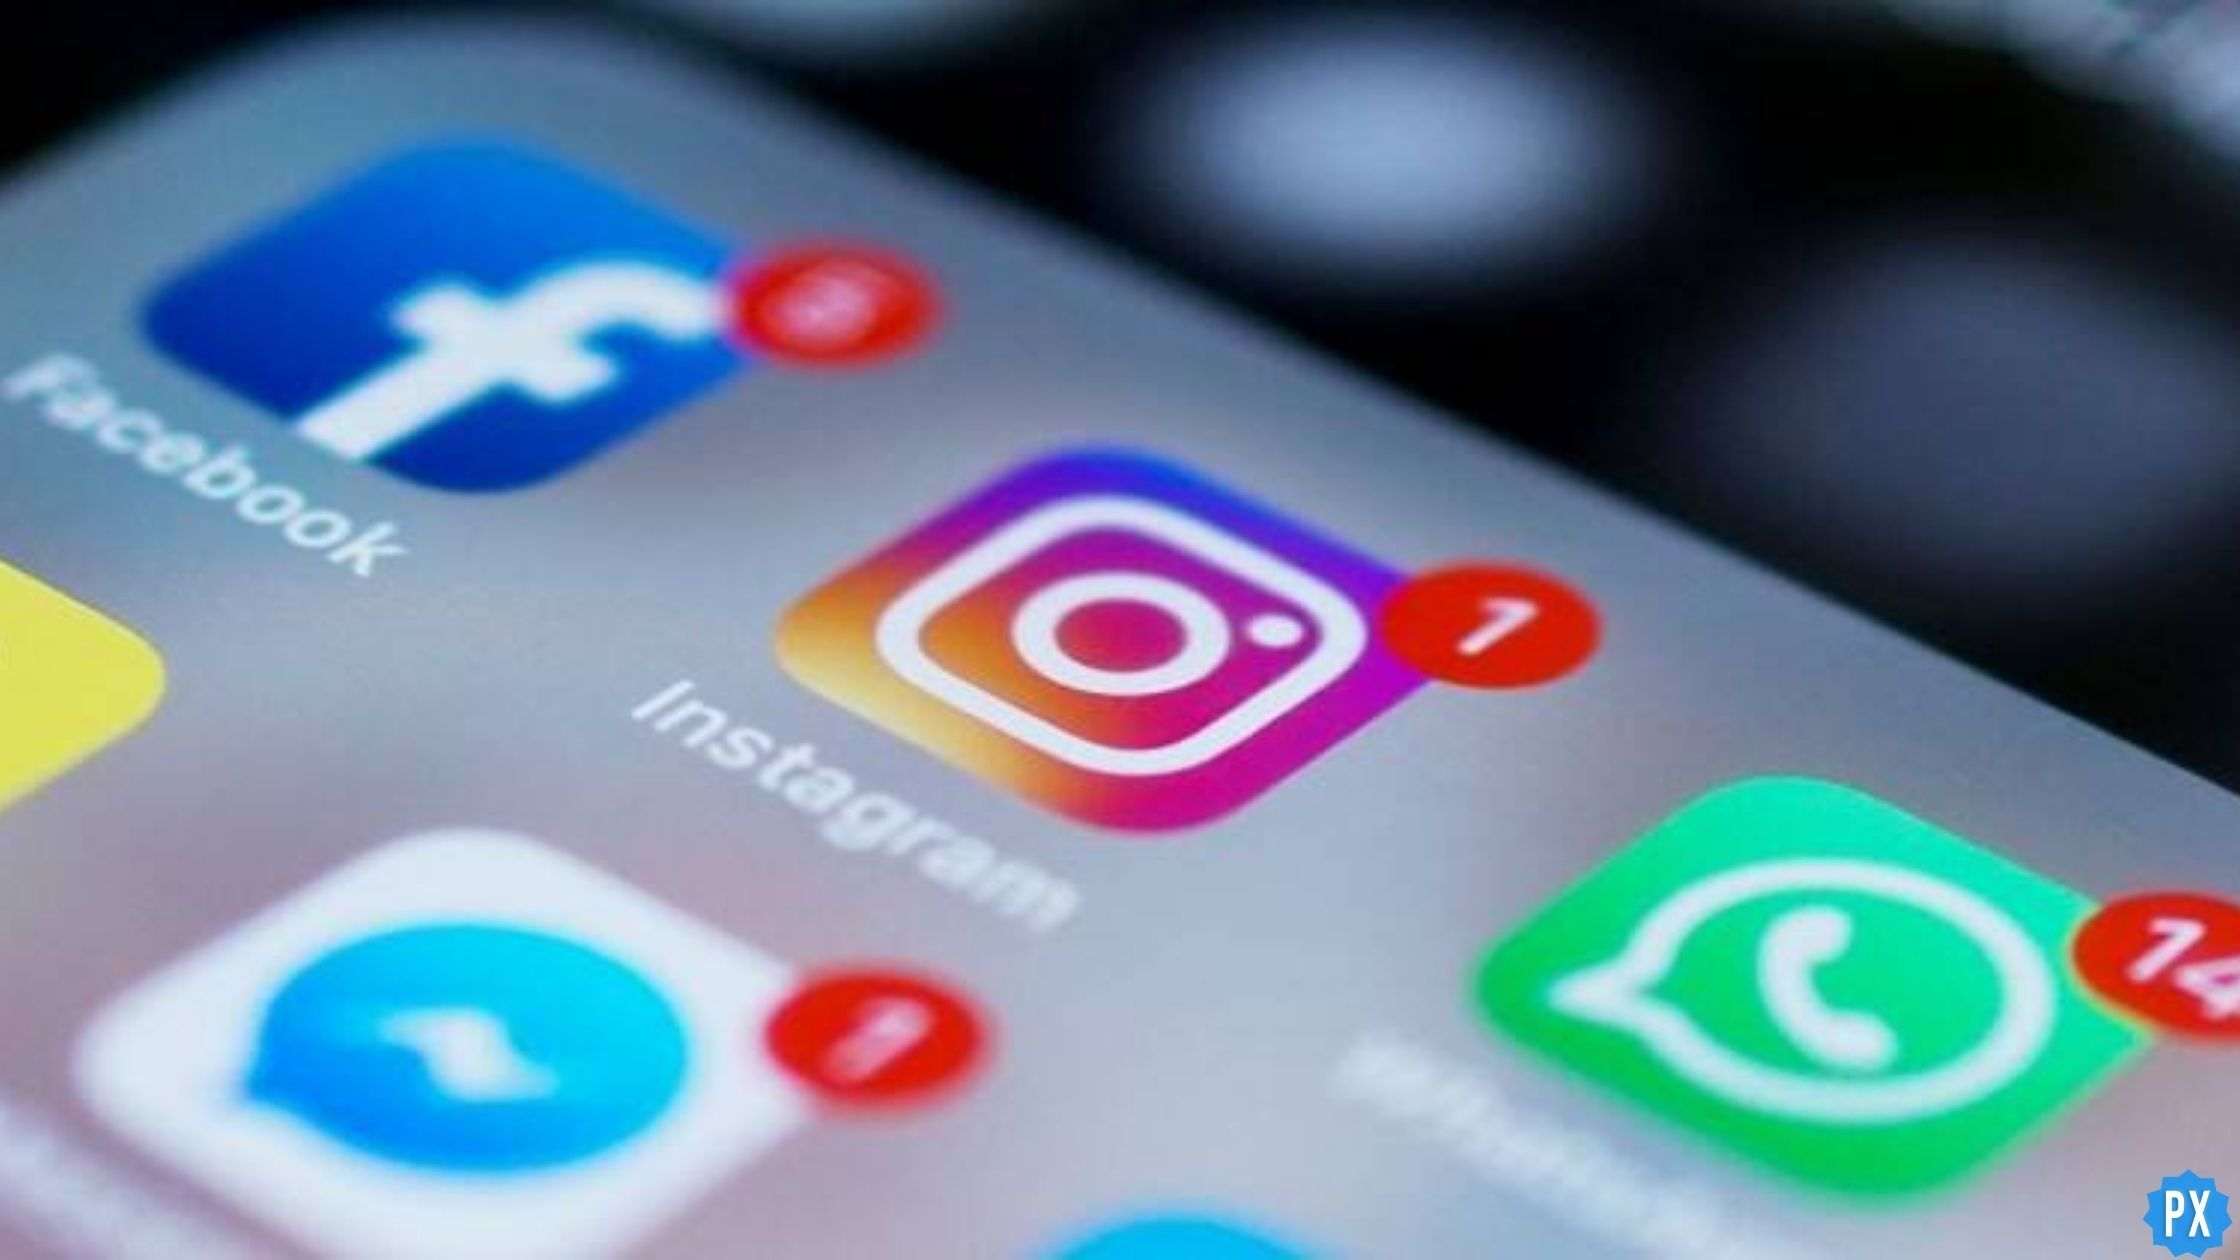 How To Make A Second Instagram Account Without Notifying Friends